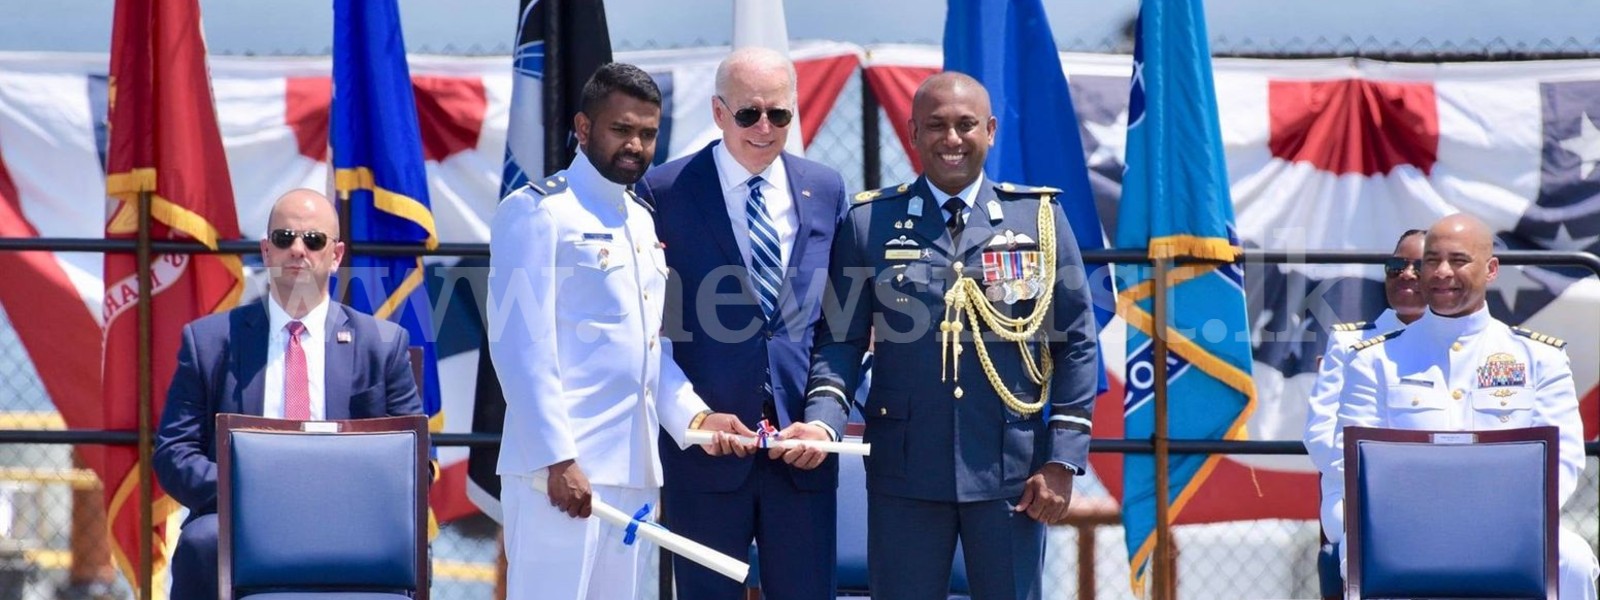 Naval Officer graduates with Honors at USCG Academy; Takes stage with President Biden